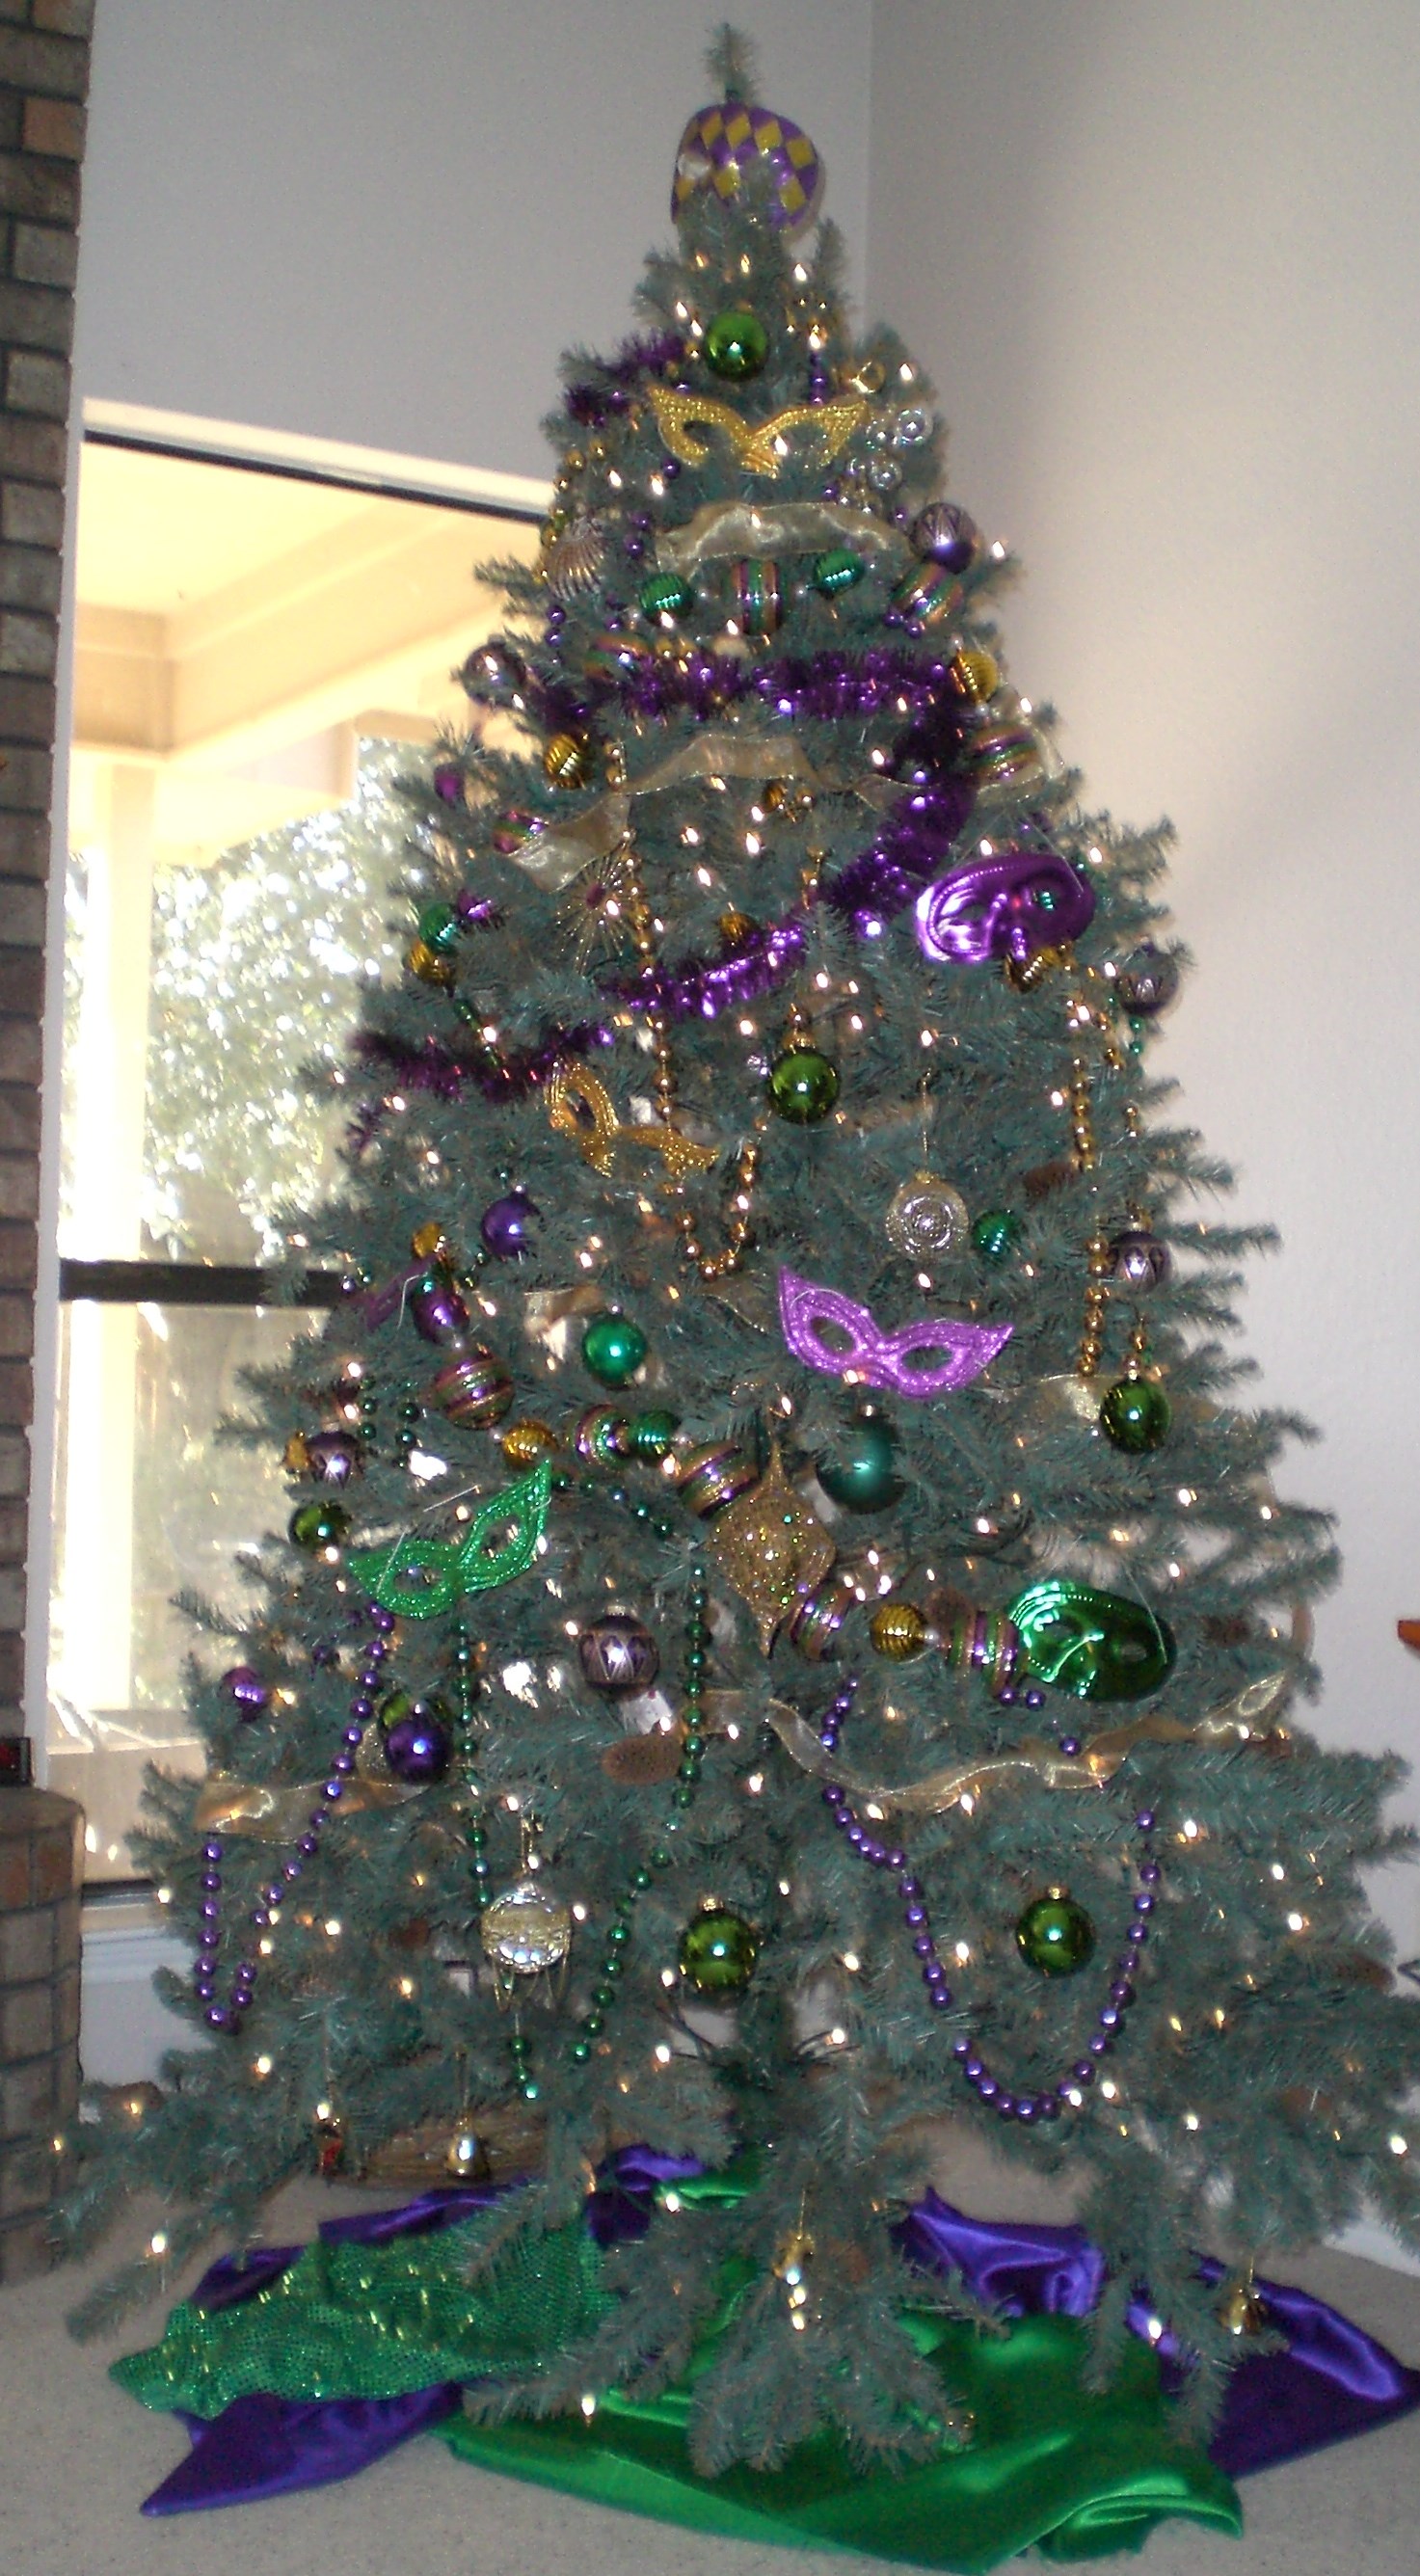 The Mardi Gras Tree (January 2016), Jeff Campbell, Local Writers' Columns, Center for Regional Heritage Research